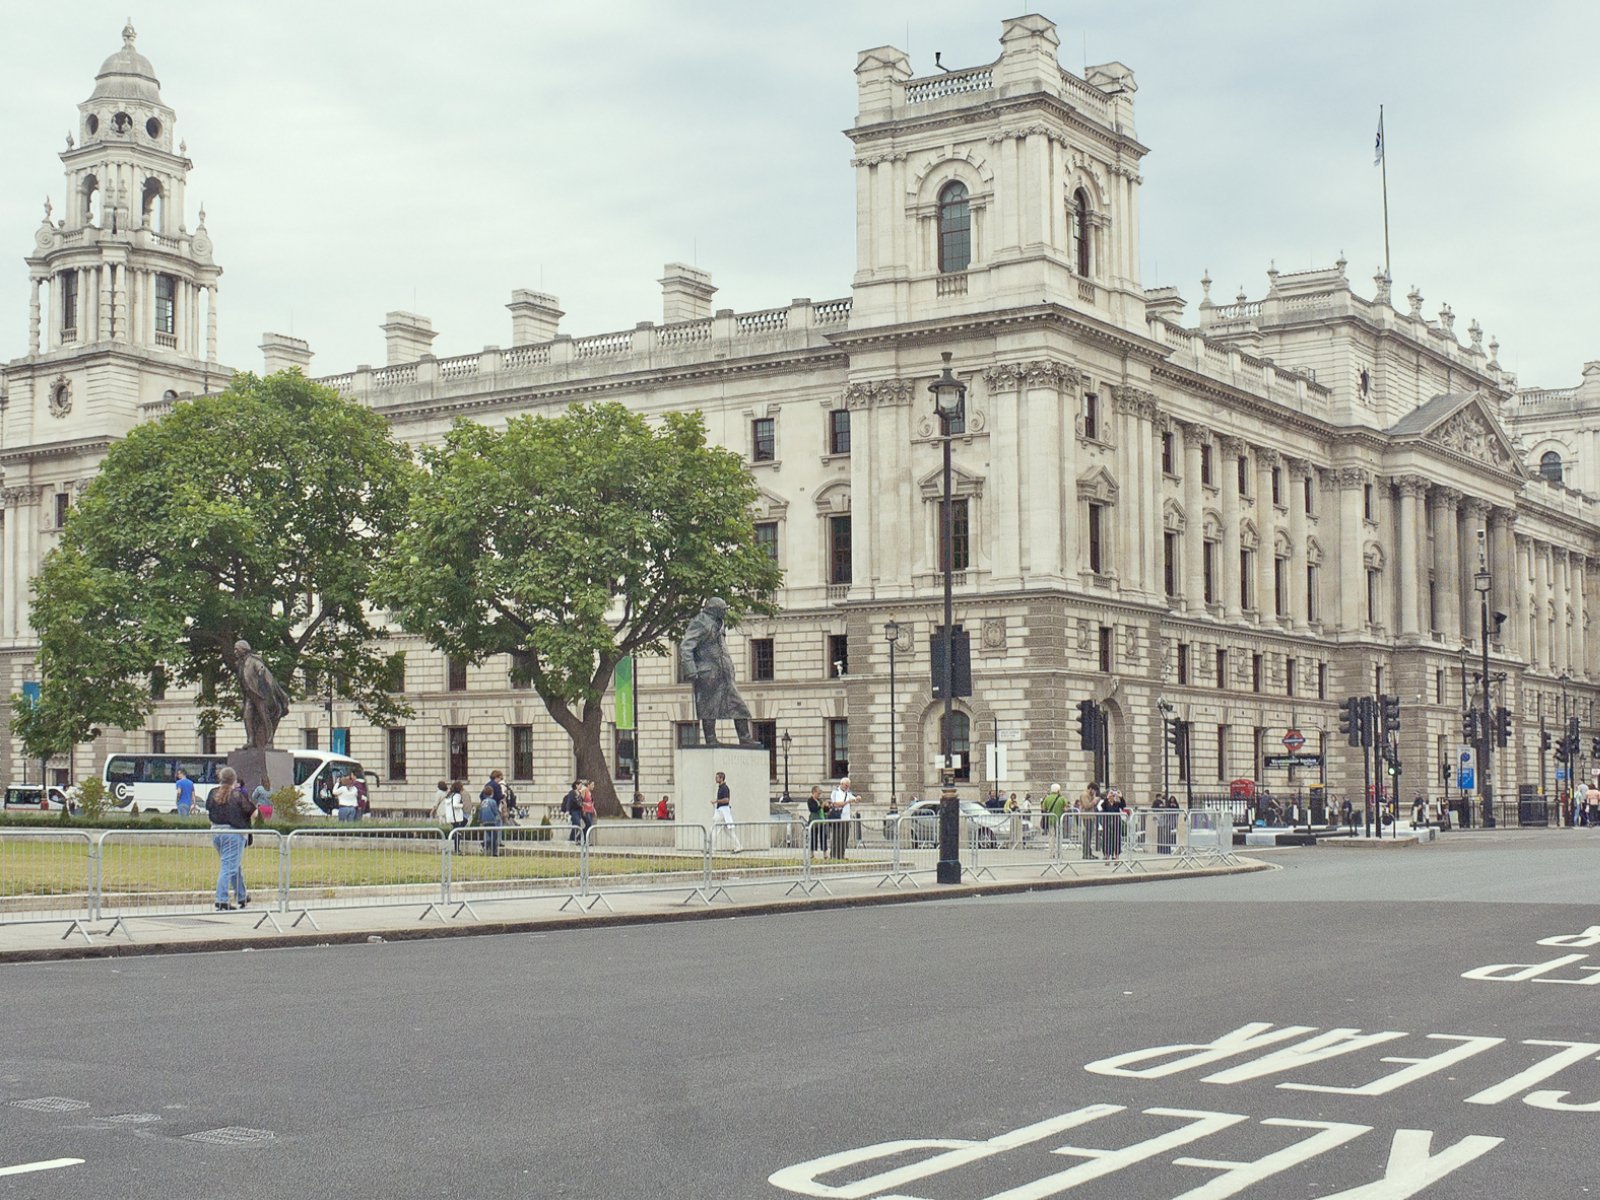 The hotel will be in the former Old War Office building in London.